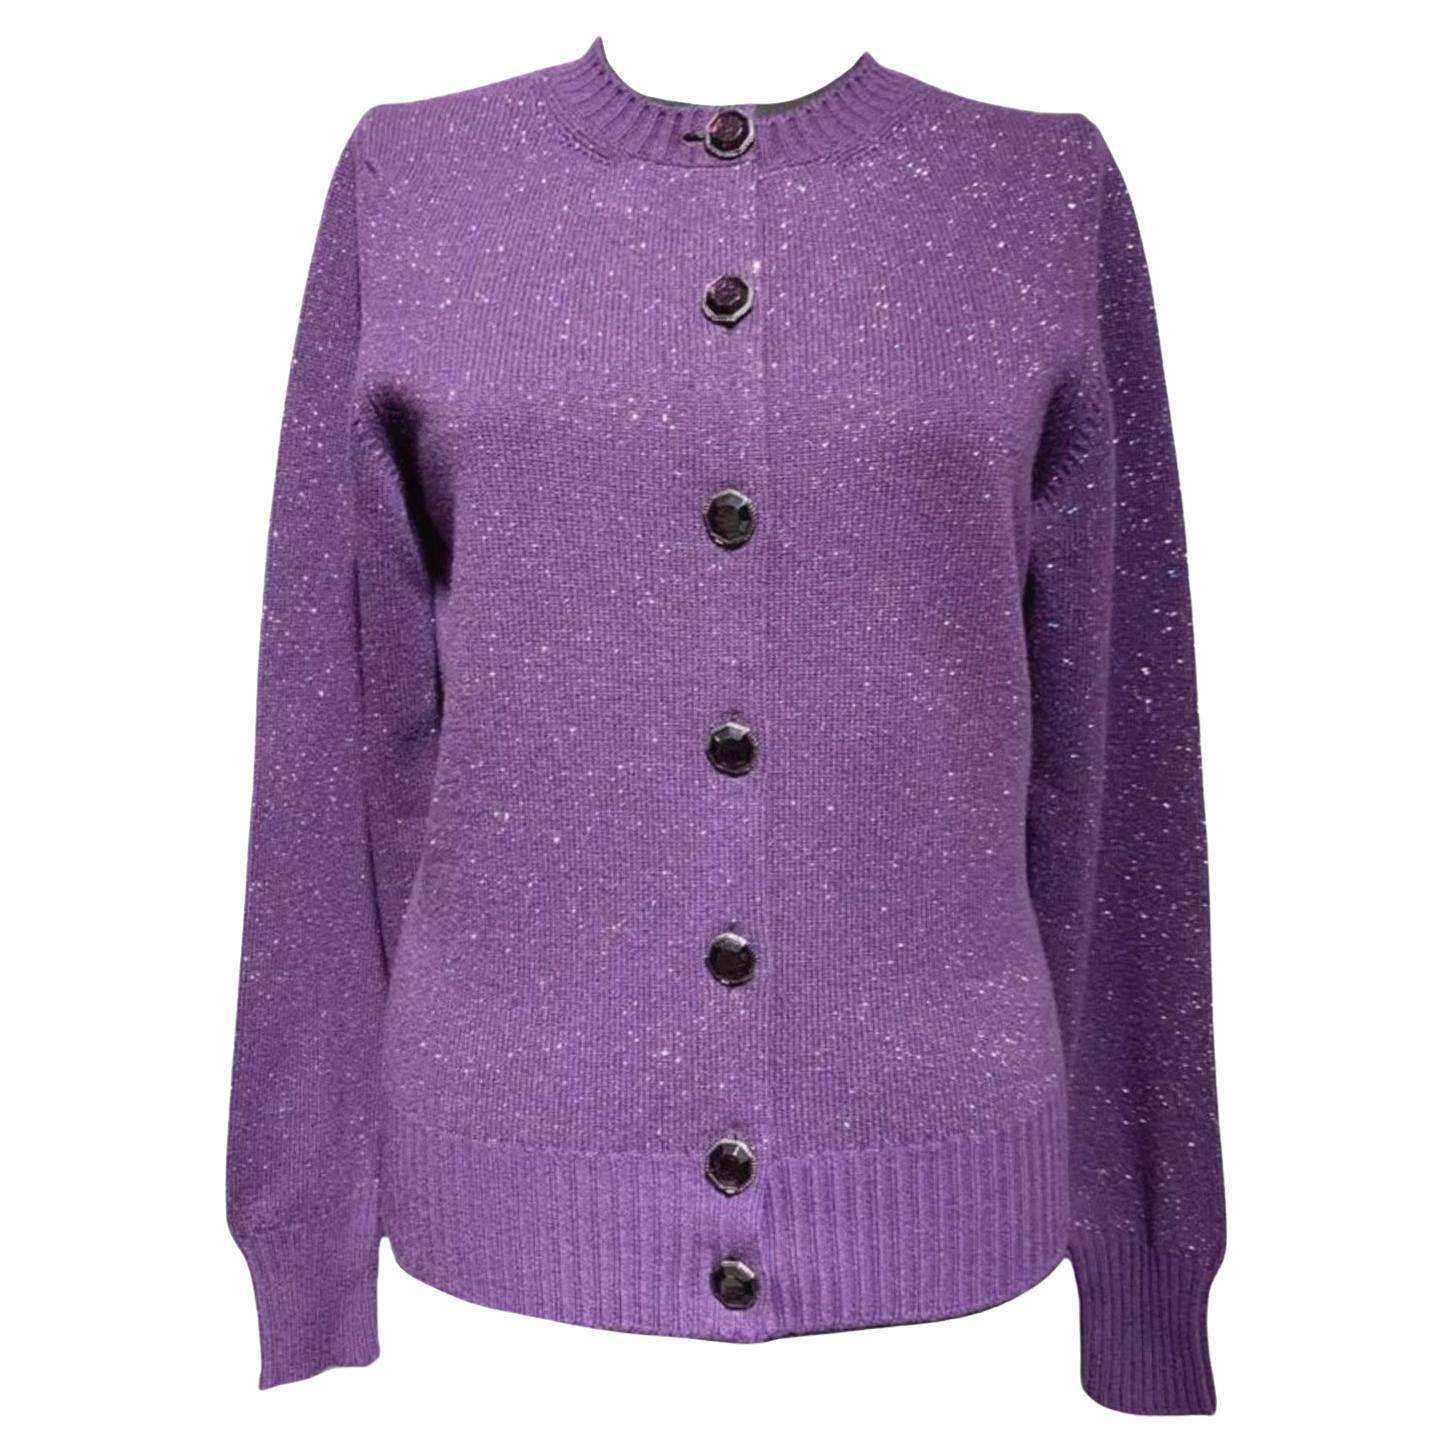 Chanel Cara Delevingne Style Runway Cashmere Cardigan For Sale